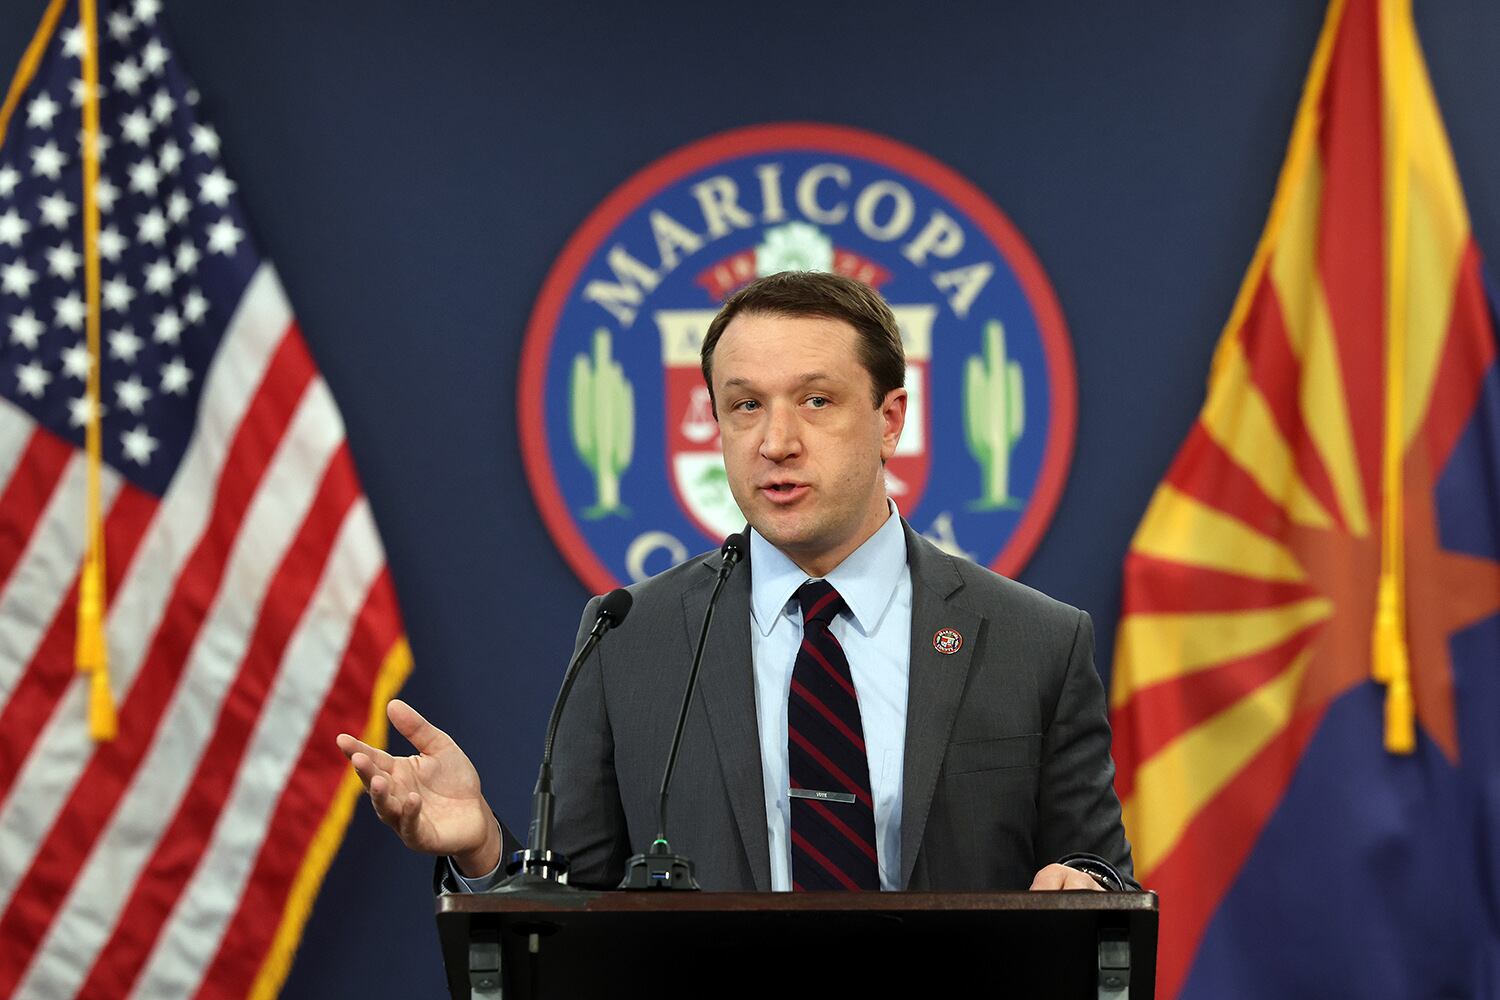 A man with short dark hair and wearing a suit stands at a podium with the Maricopa seal and American and Arizona flags in the background.